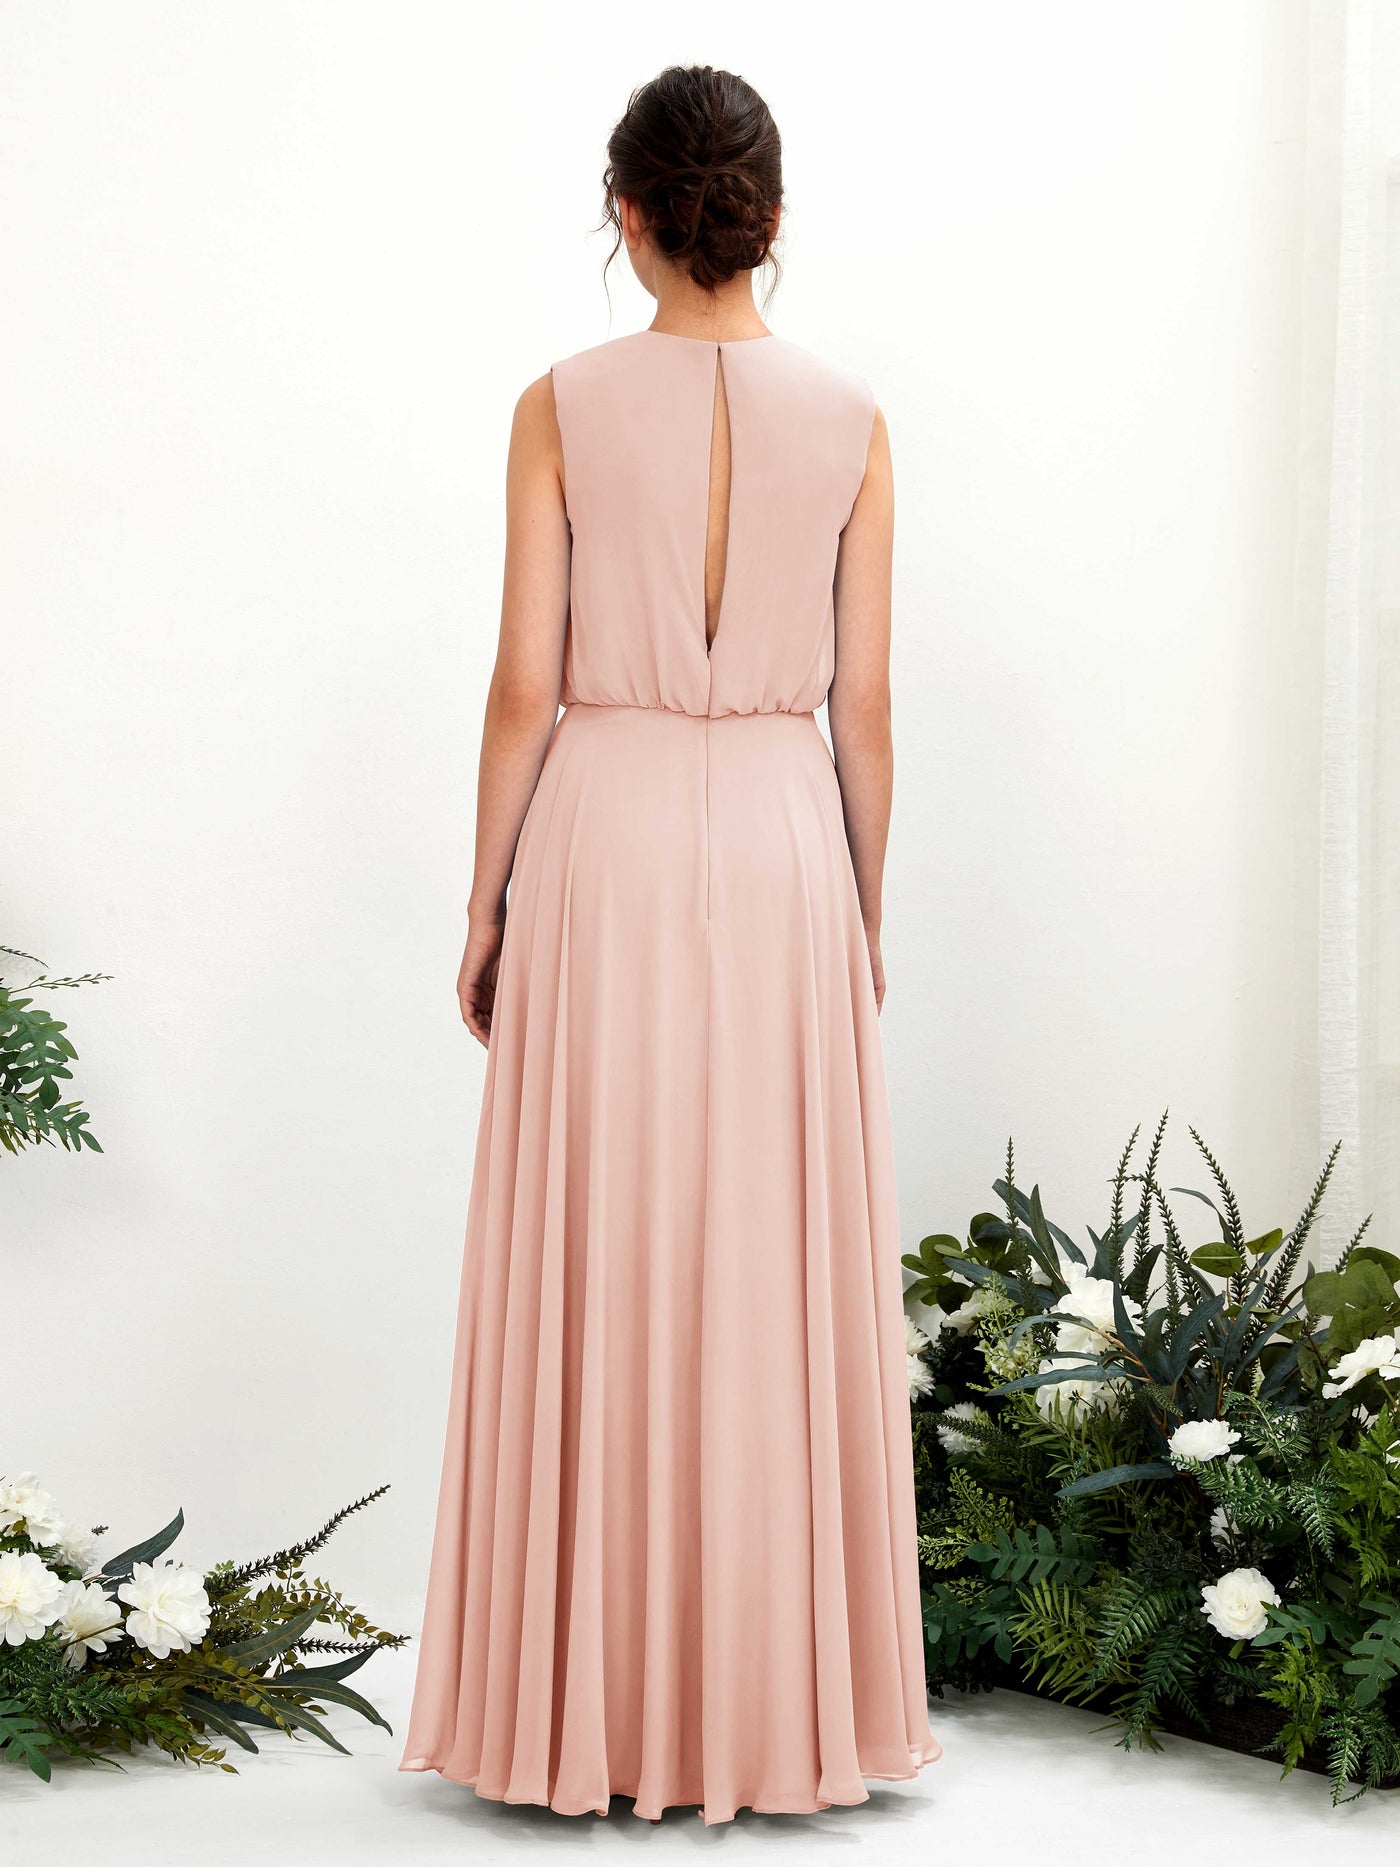 Pearl Pink Bridesmaid Dresses Bridesmaid Dress A-line Chiffon Round Full Length Sleeveless Wedding Party Dress (81222808)#color_pearl-pink